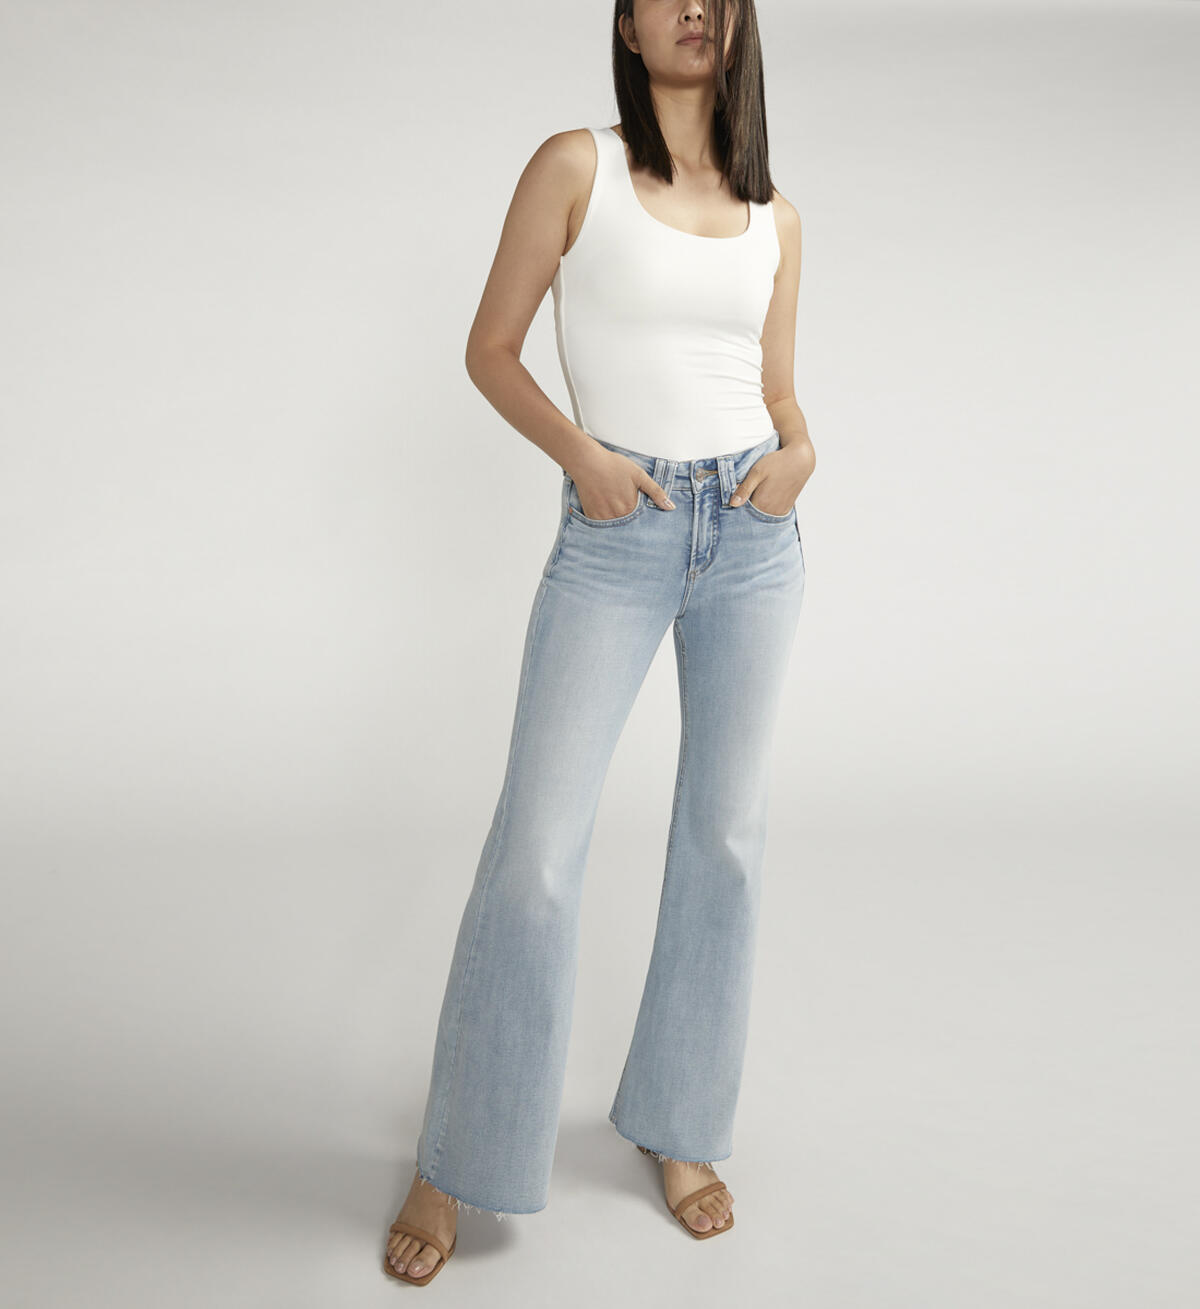 Suki Mid Rise Flare Jeans, , hi-res image number 4